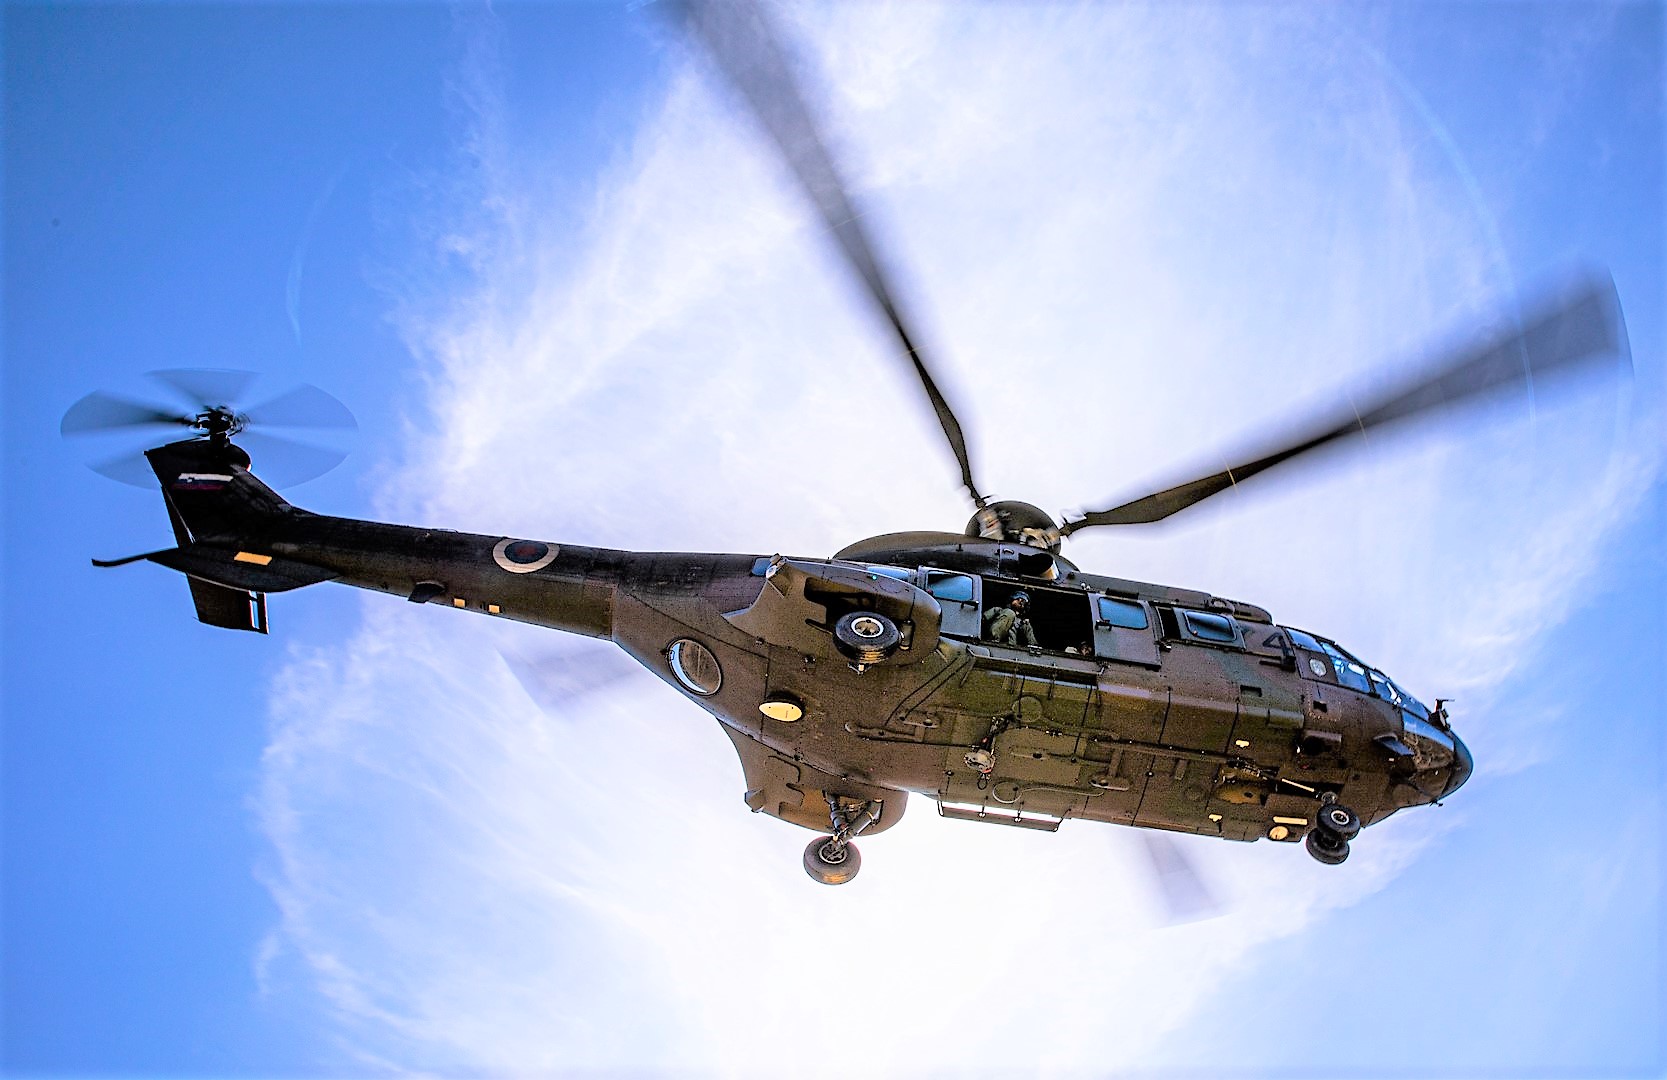 EDA Helicopter Exercise Programme Fire Blade 2022 kicks off in Hungary 1